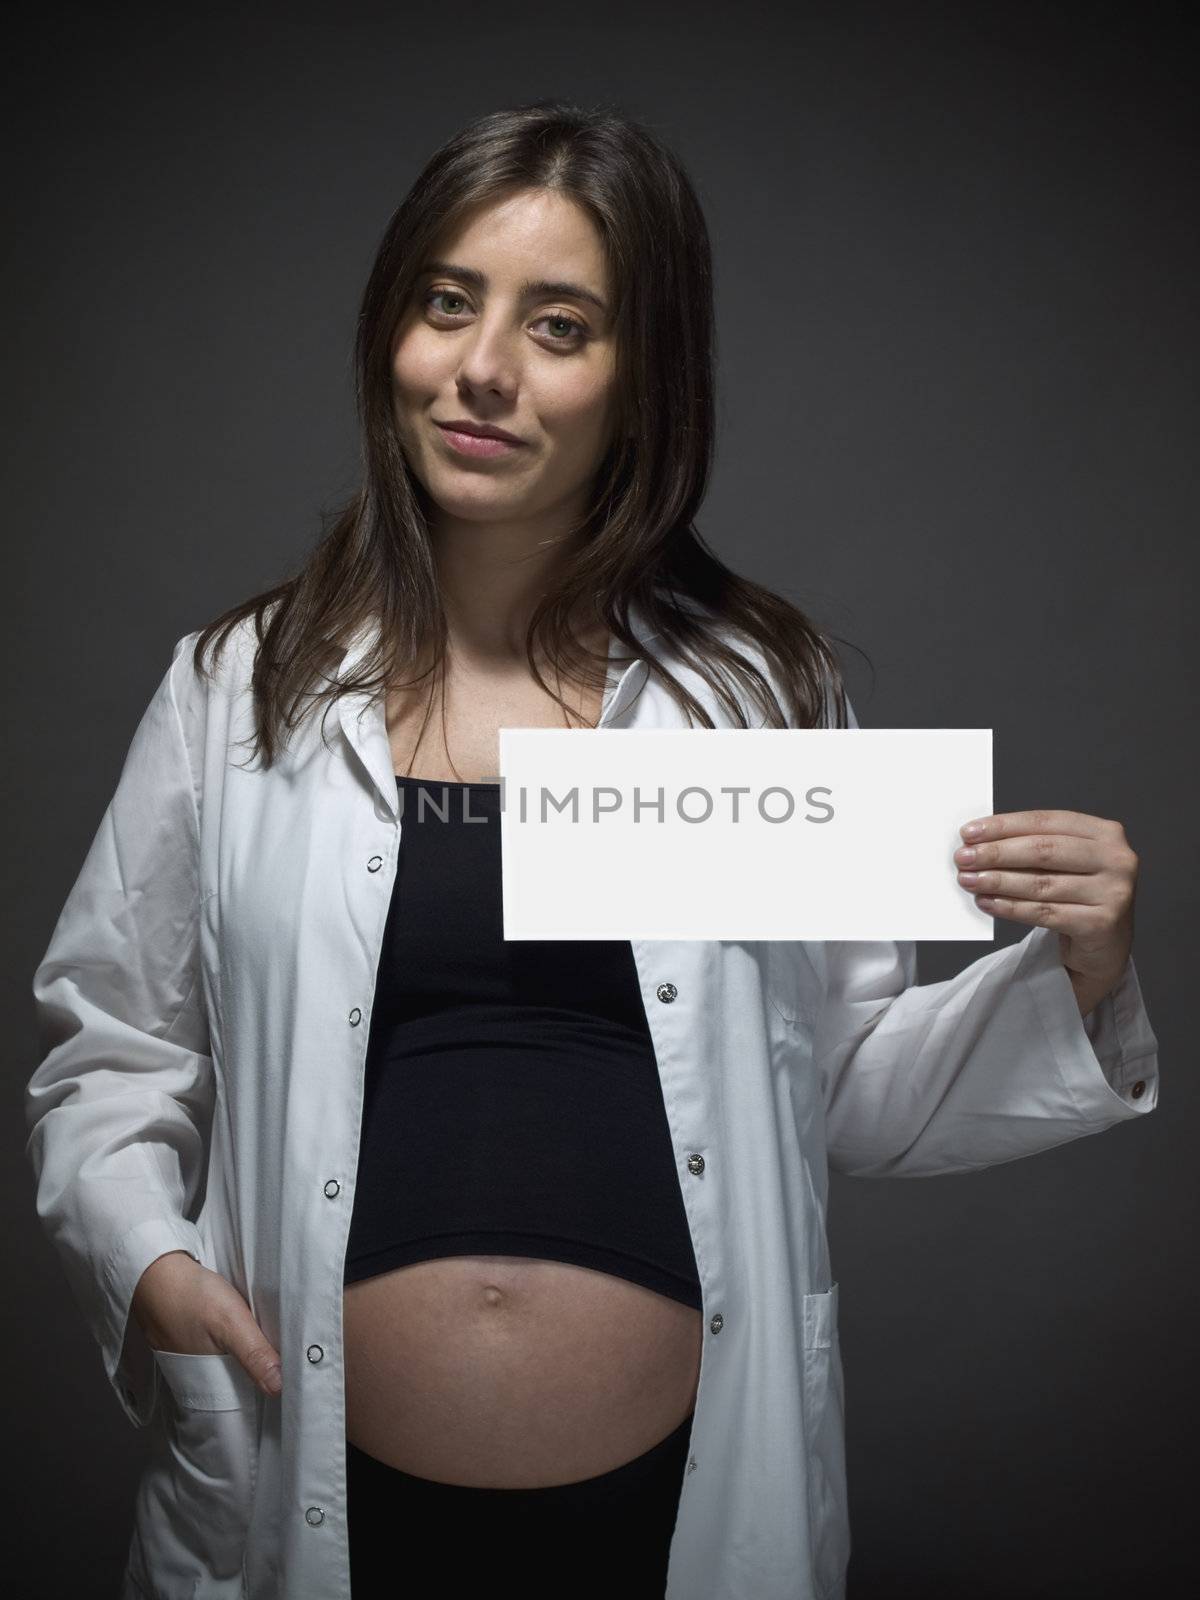 Pregnant female doctor holding a white card over gray background.